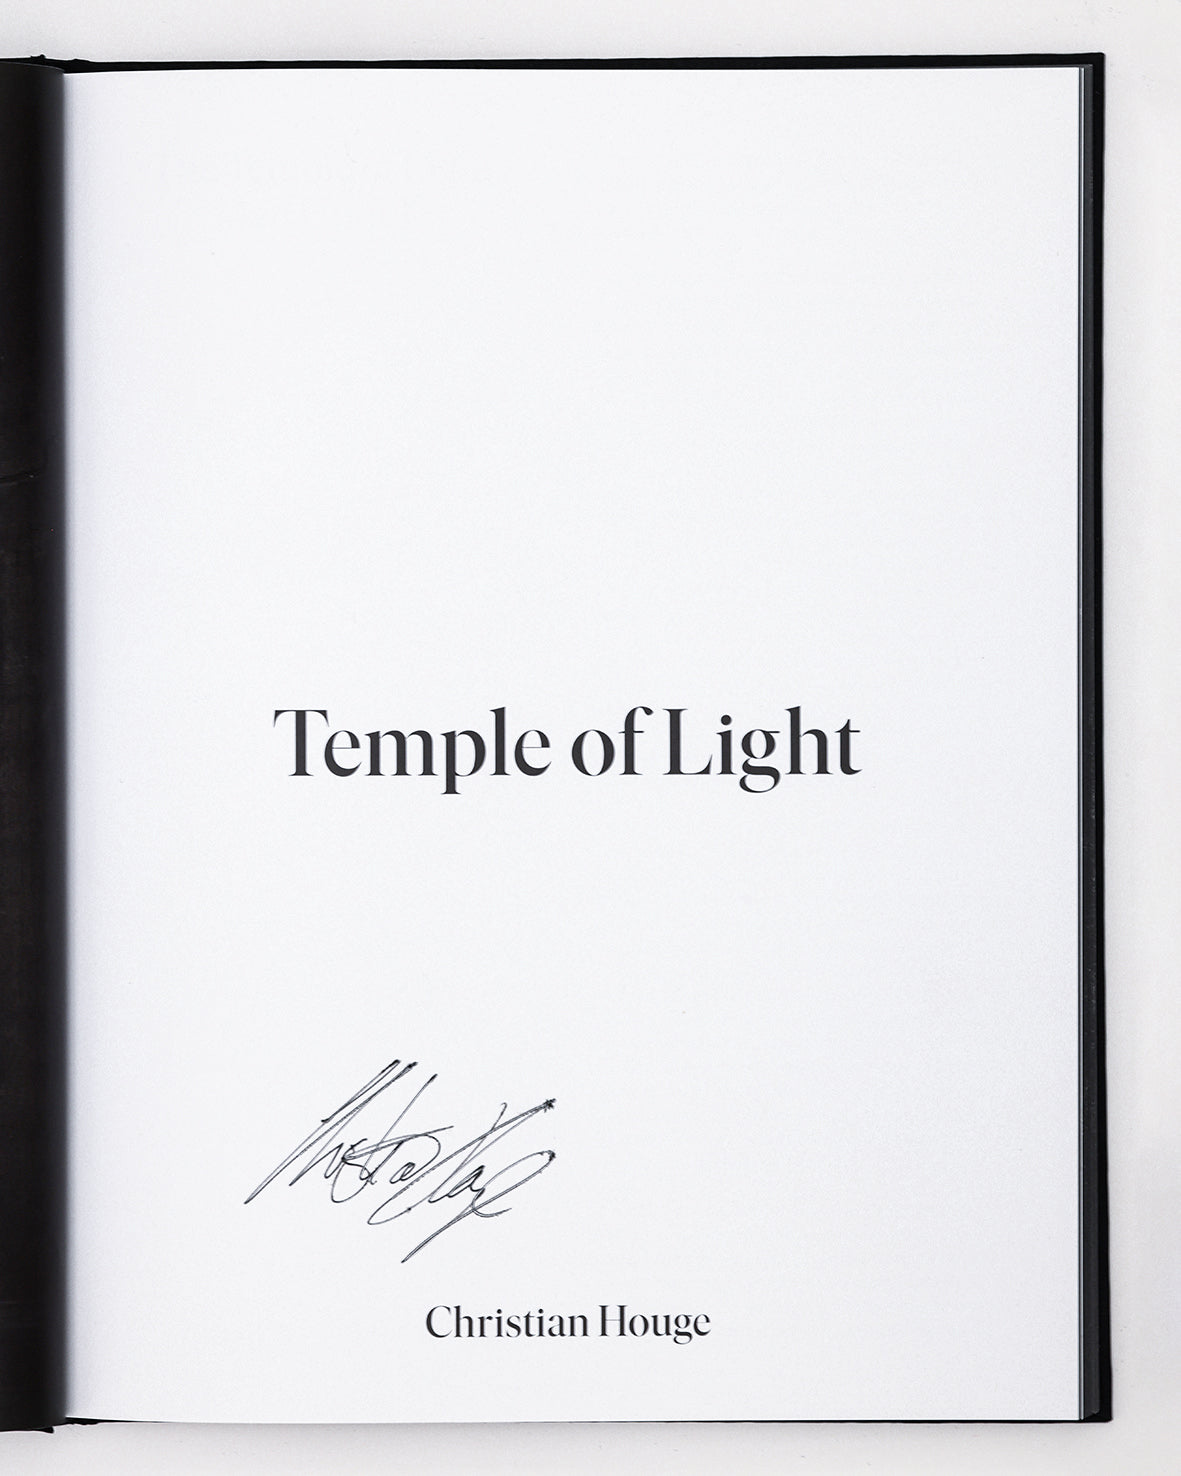 Christian Houge - Temple of Light